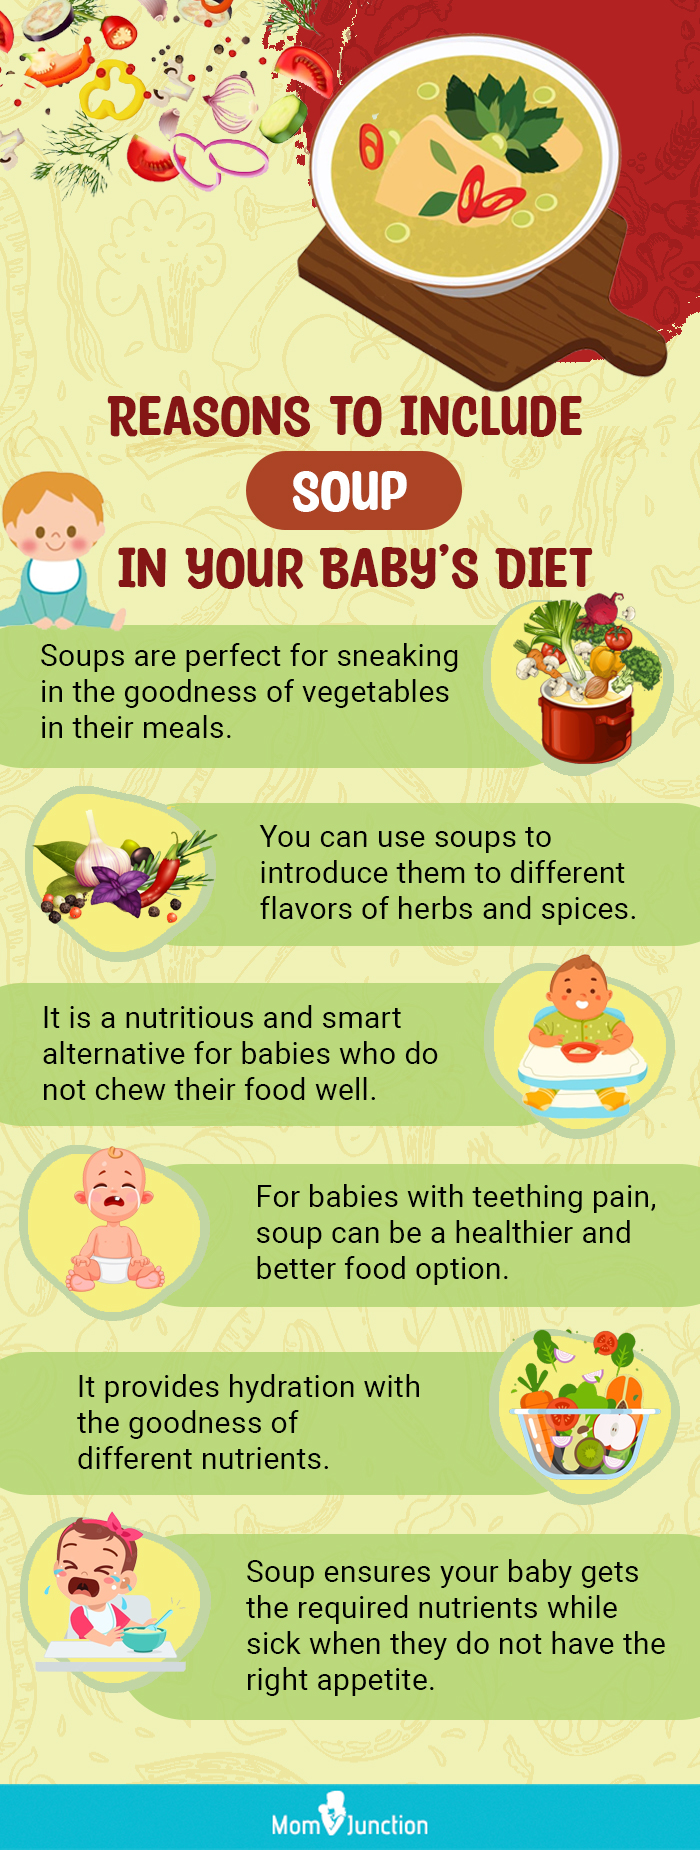 reasons to include soup in your baby’s diet [infographic]